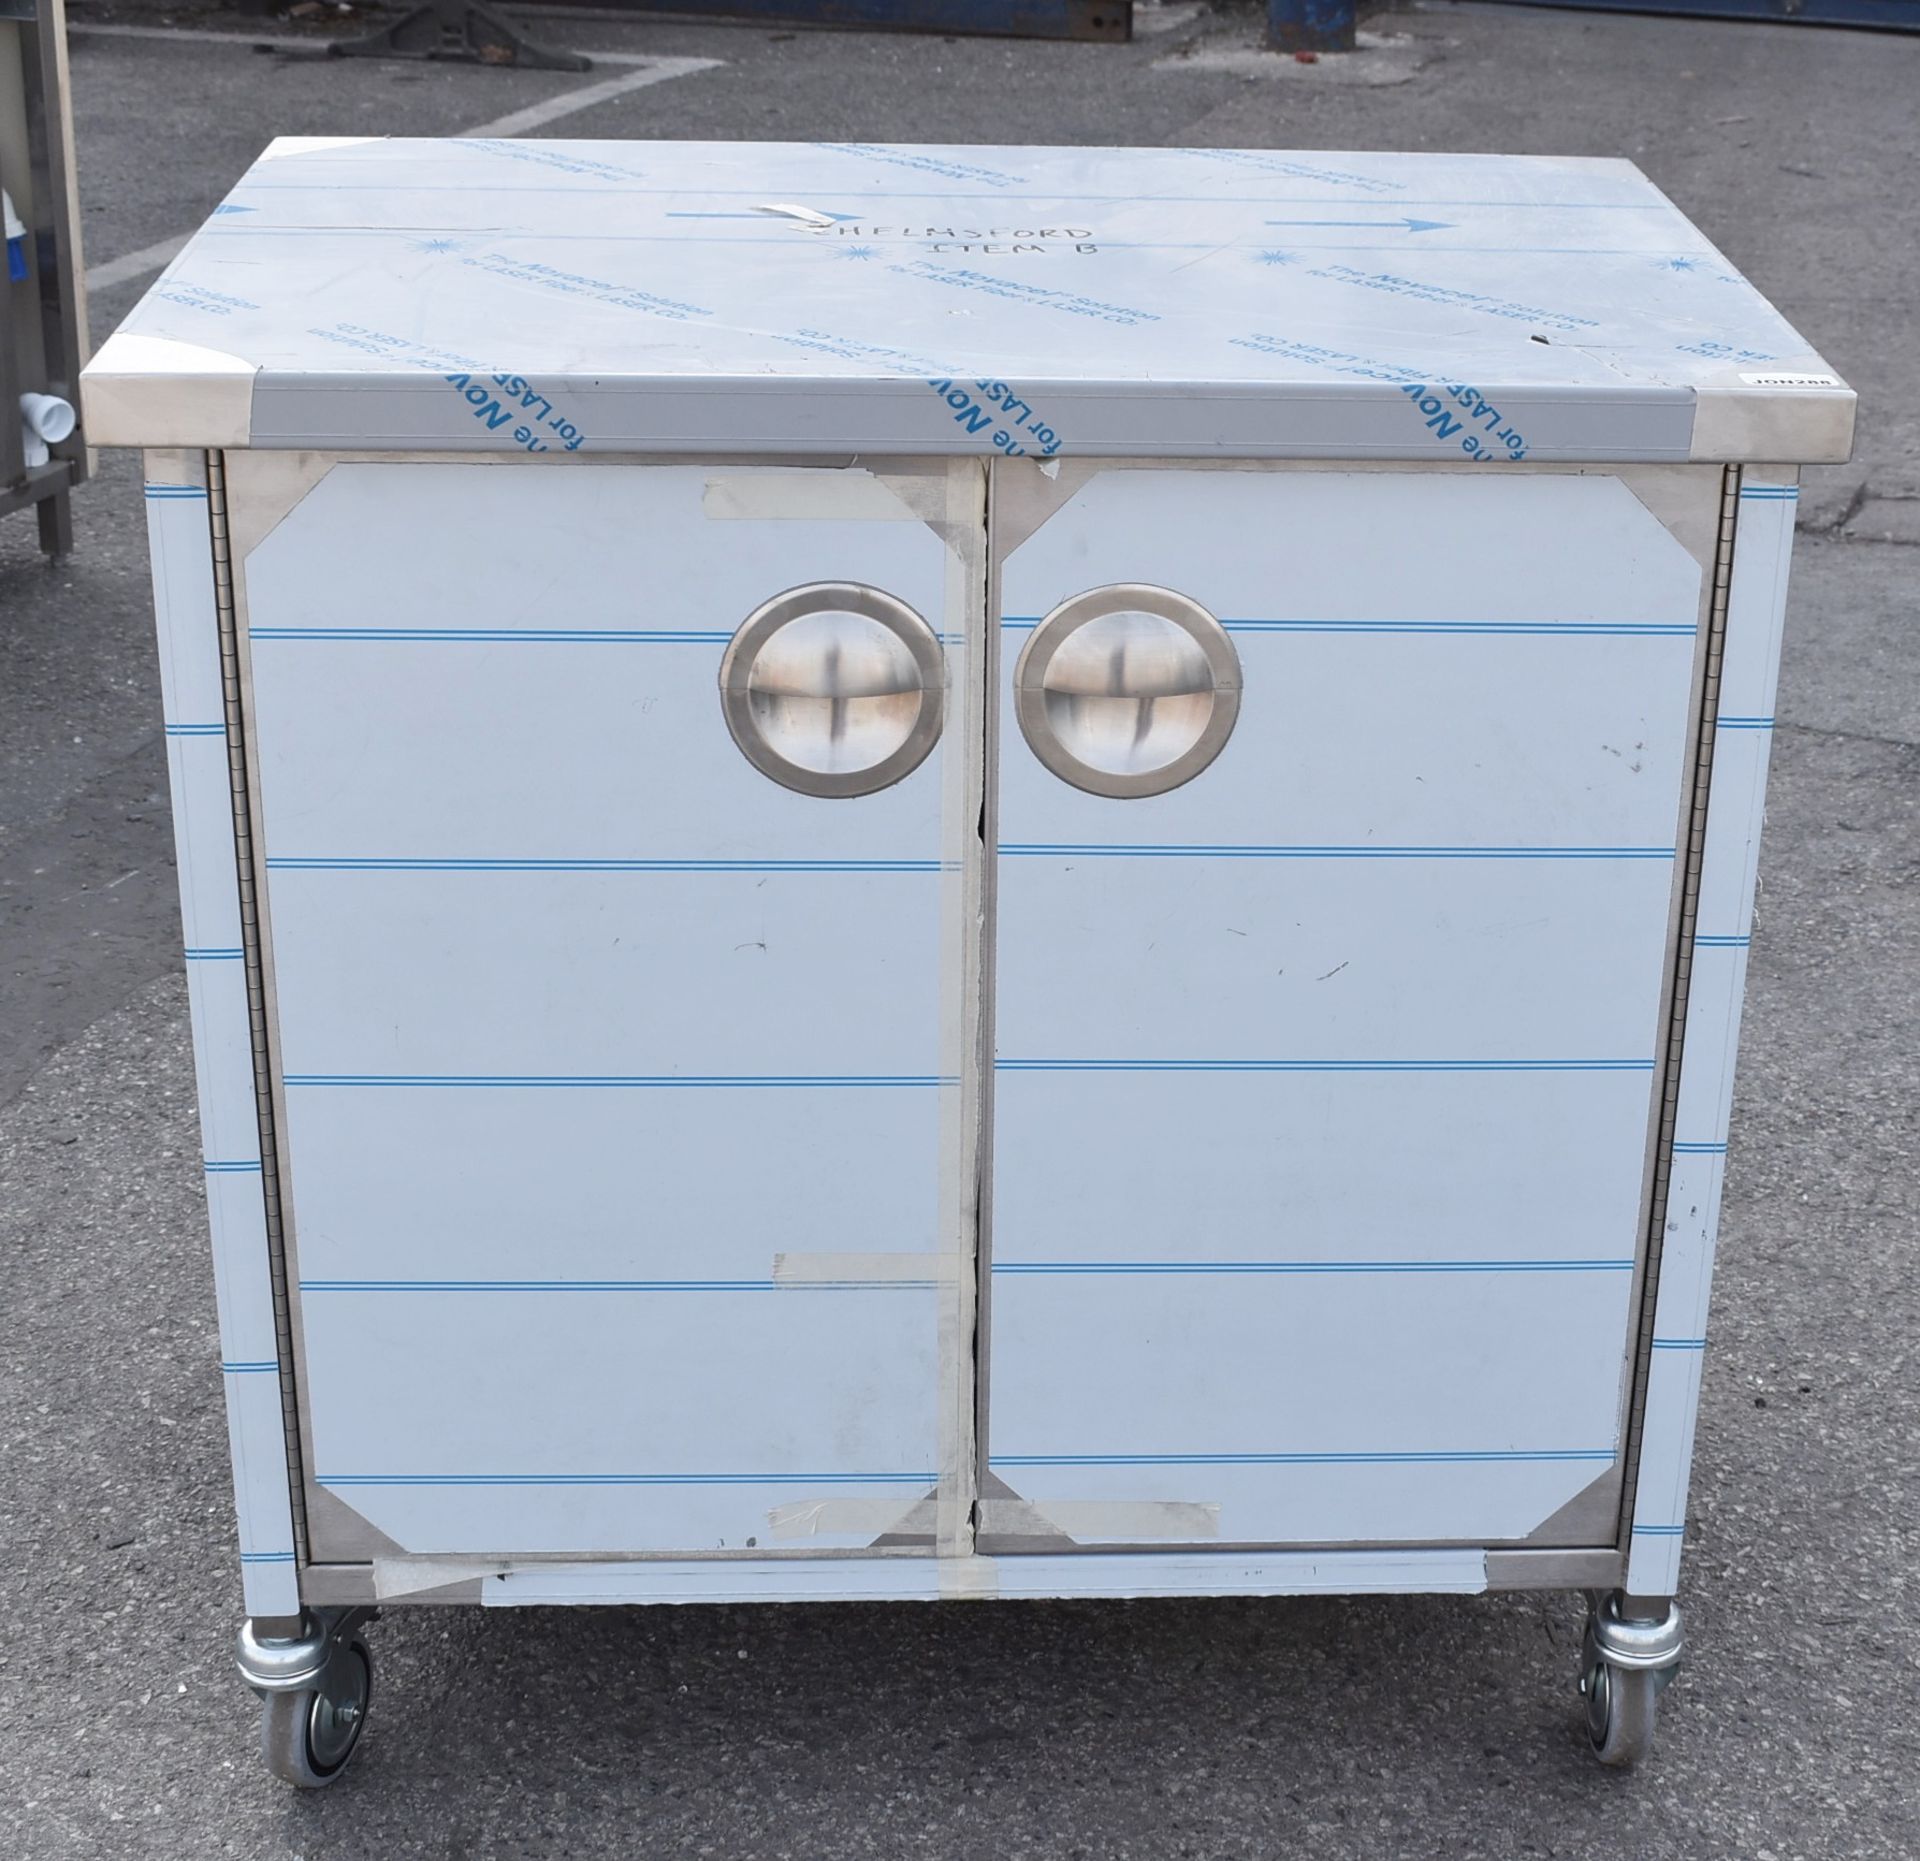 1 x Stainless Steel Mobile Prep Cabinet - New and Unused - Dimensions: H91 x W90 x D60 cms - - Image 2 of 7